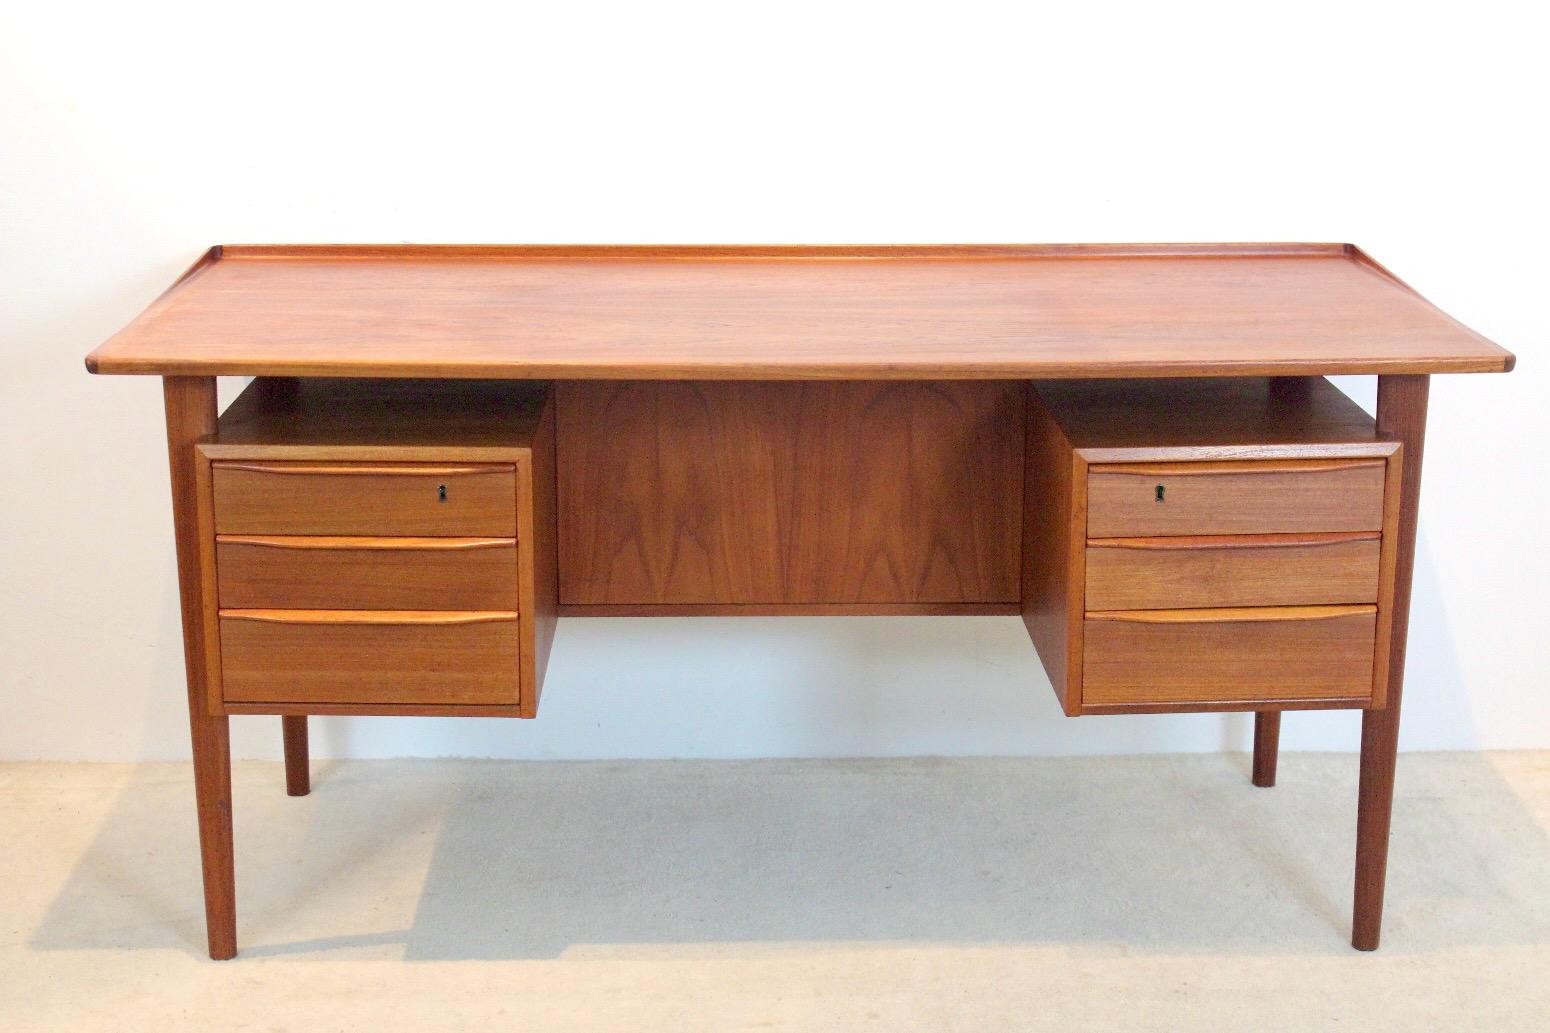 Exquisite Danish free-standing desk in teak. Designed by Peter Løvig Nielsen and produced by Hedensted Møbelfabrik Denmark in 1970. The Desk is made of teak wood and features two sets of three drawers on each side and 2 storage compartments as well